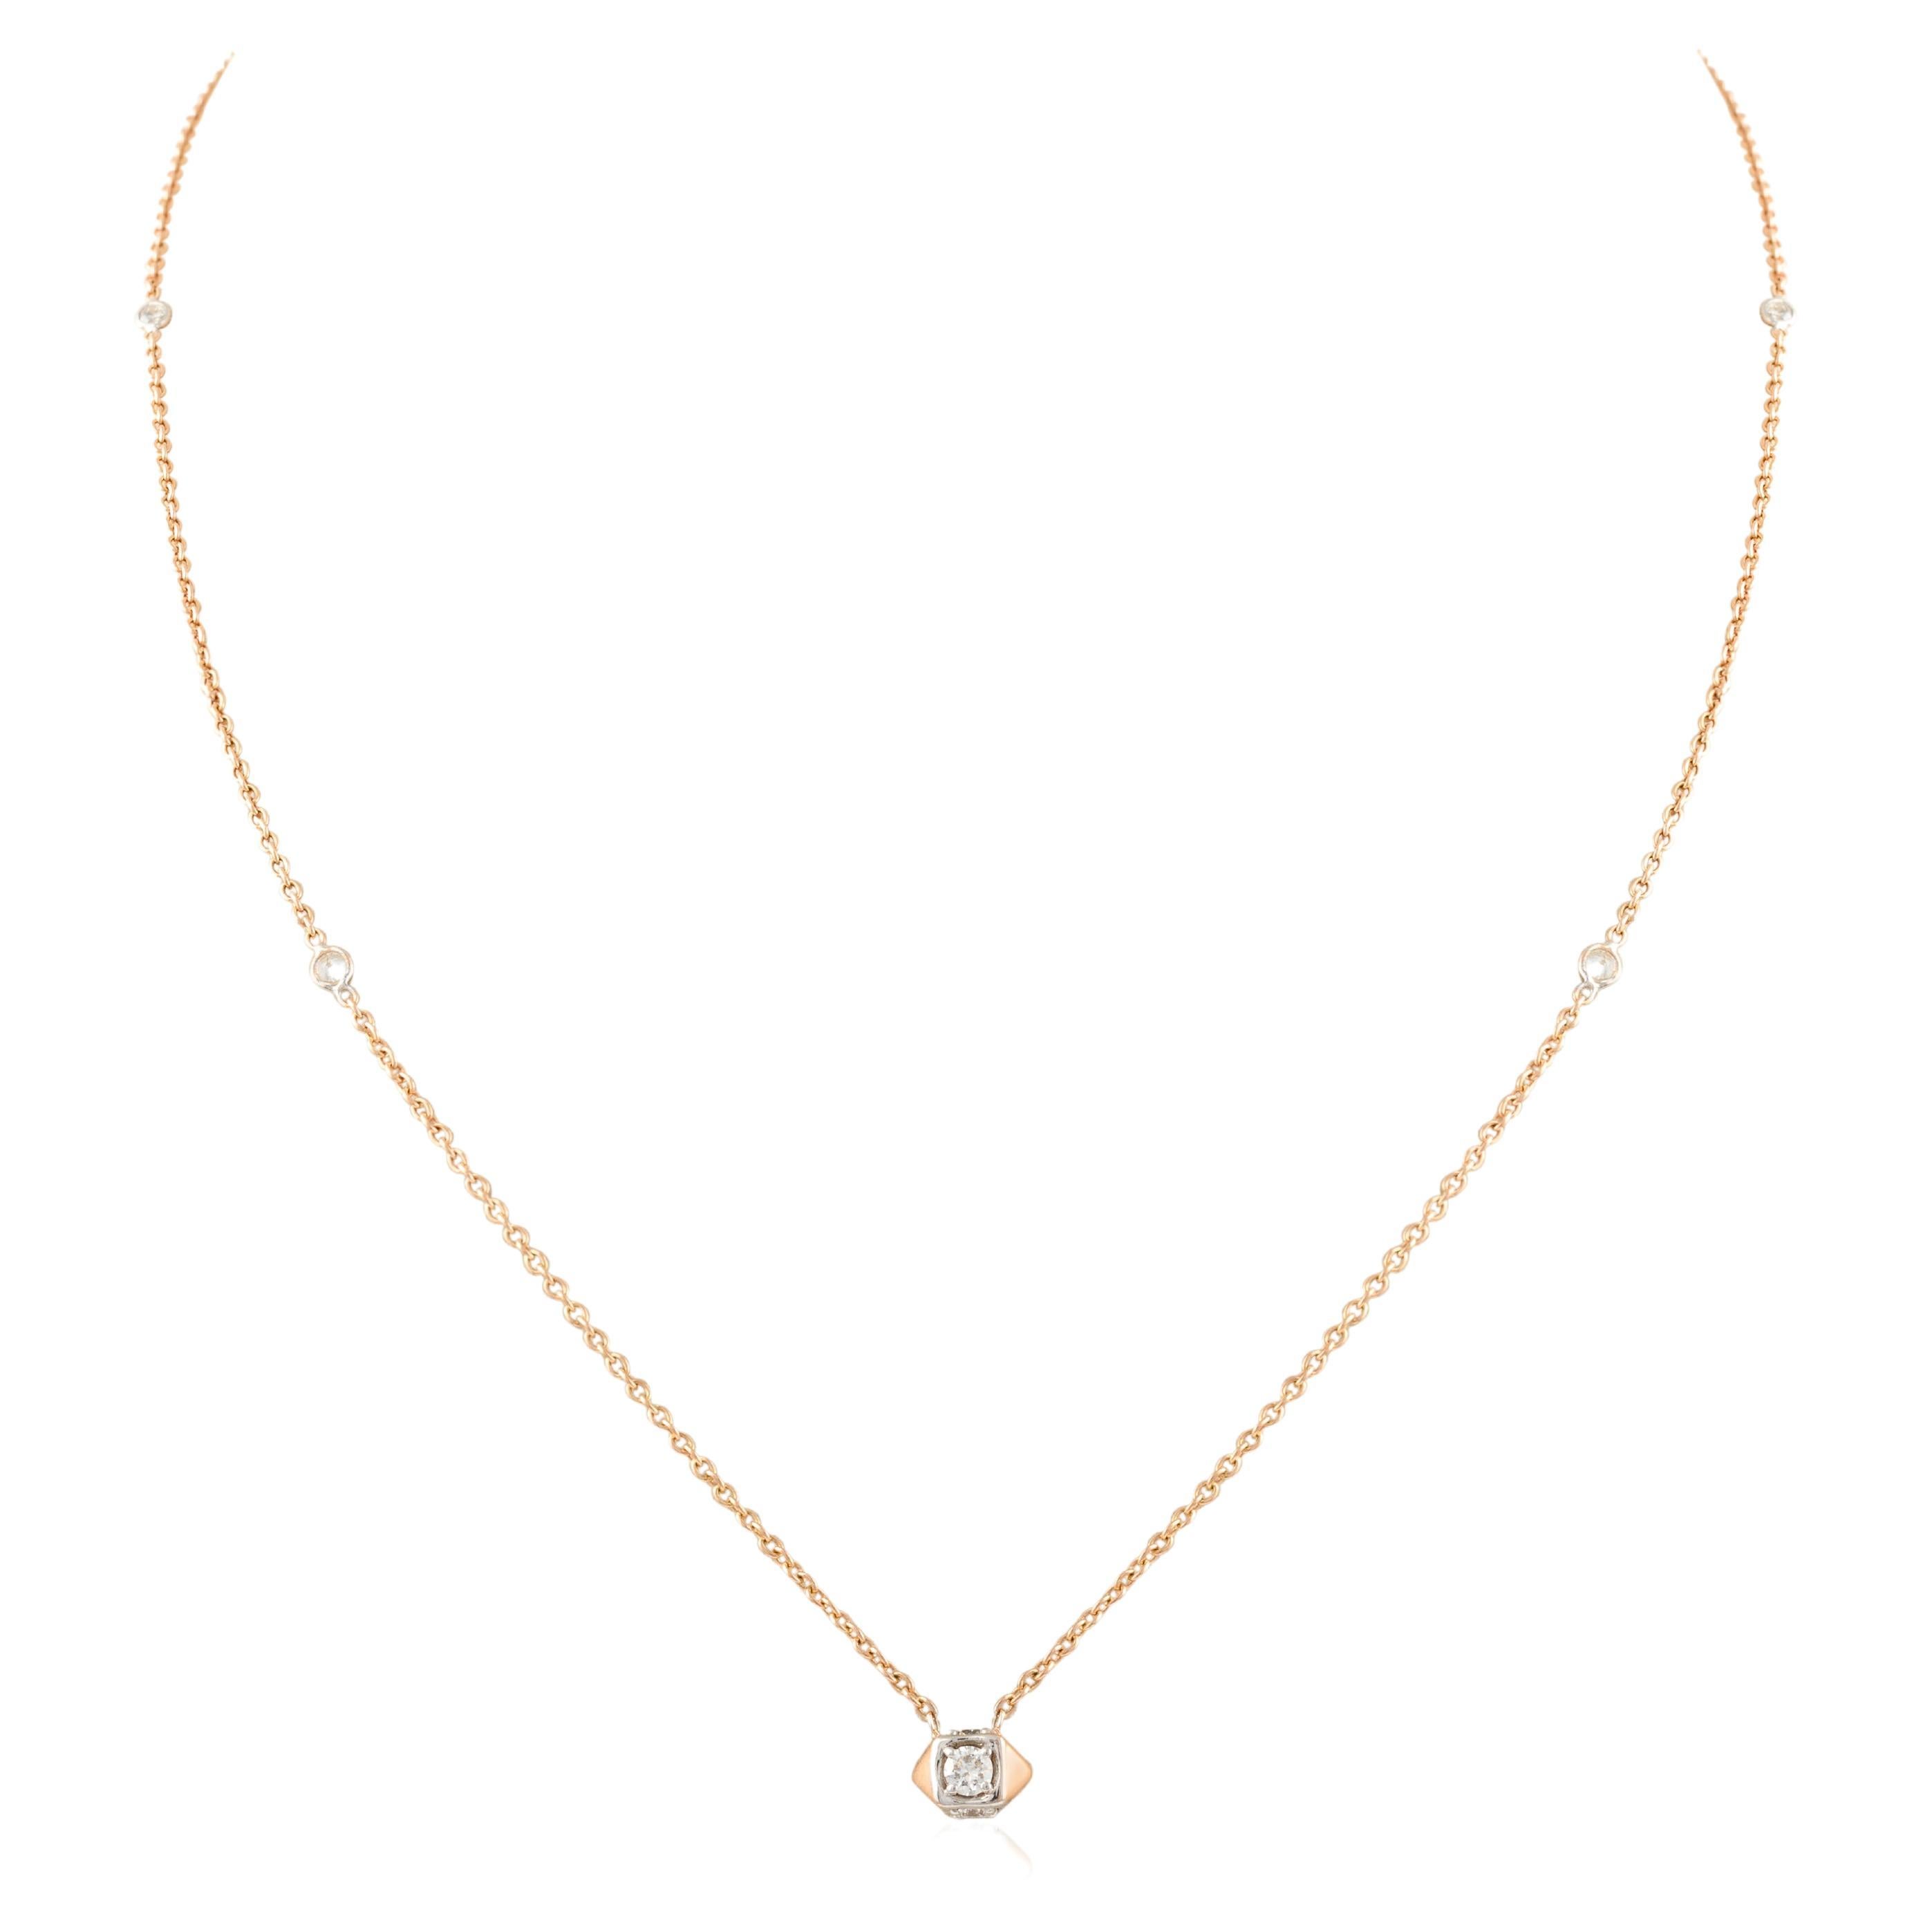 Minimalist Diamond Chain Necklace in 18k Solid Rose Gold, Thanksgiving Gift